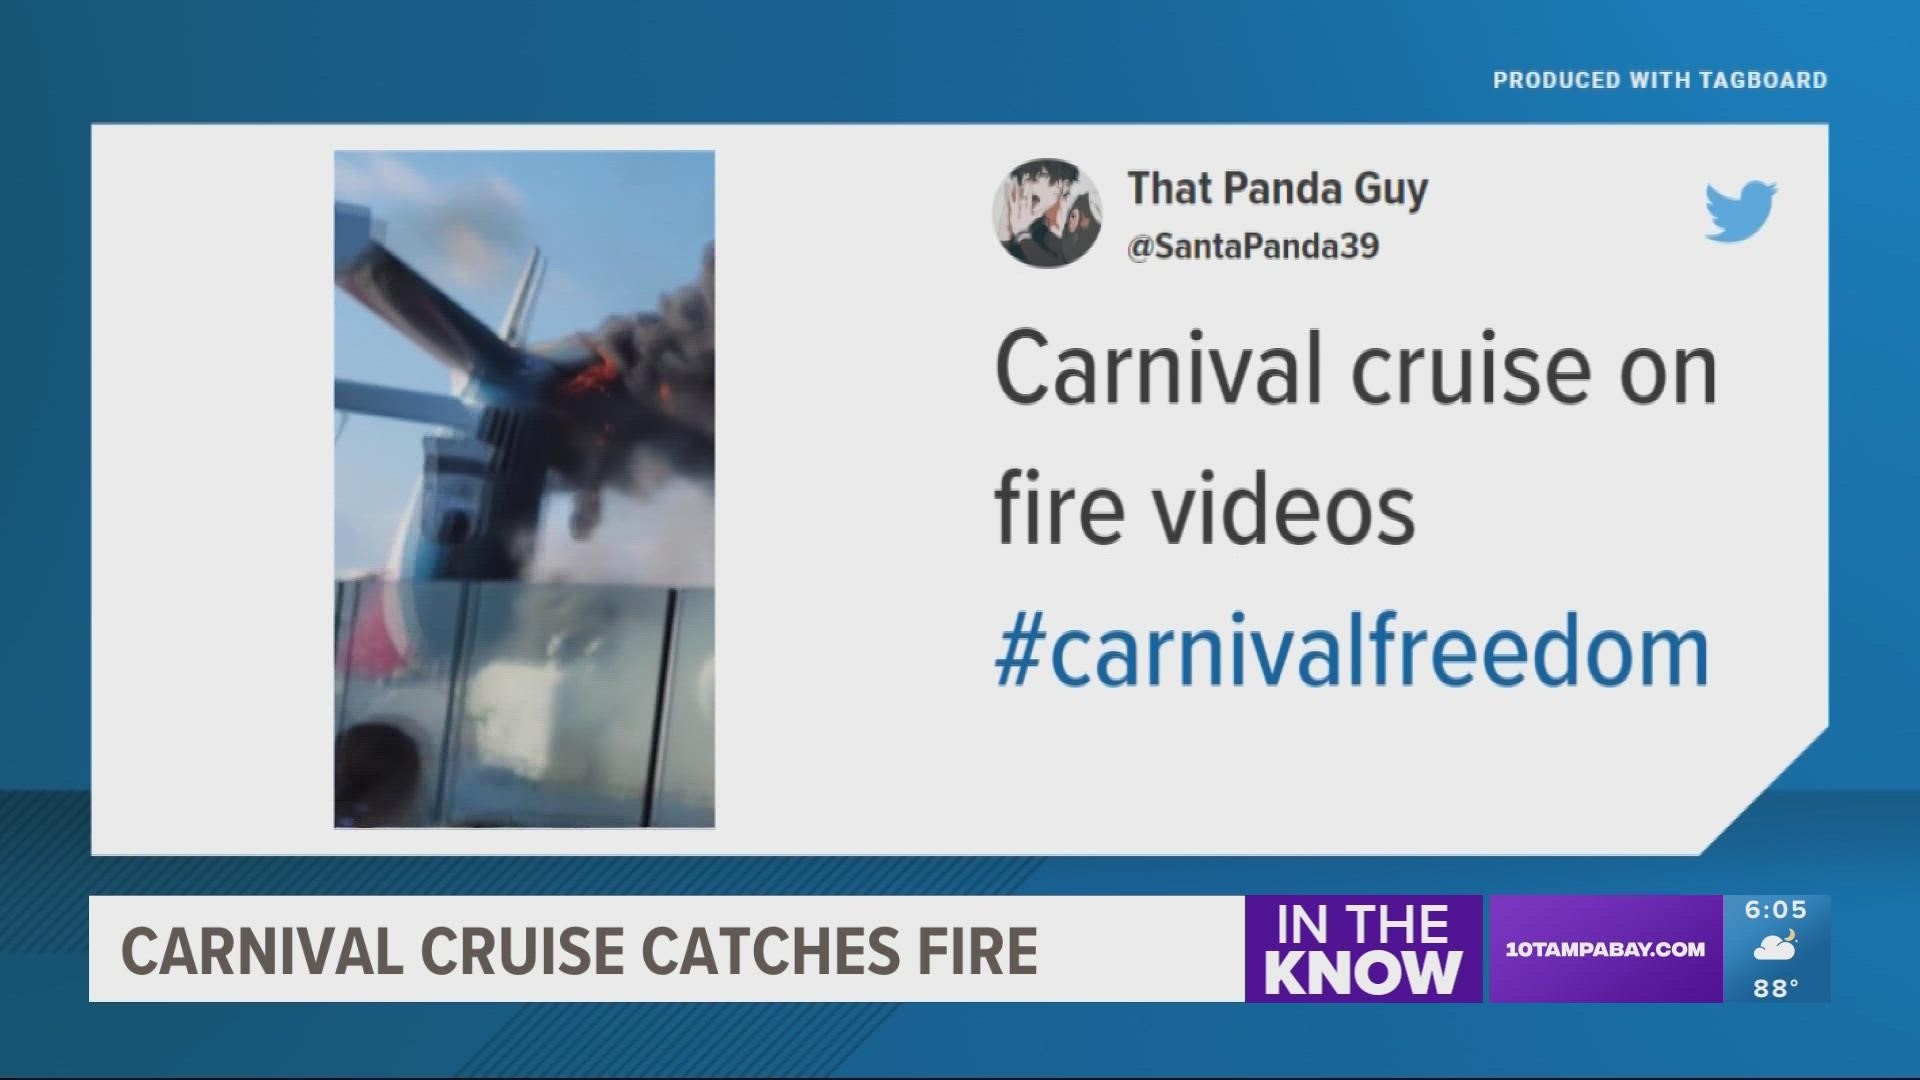 Twitter users shared photos and videos of flames and black smoke billowing from the top of the docked ship.